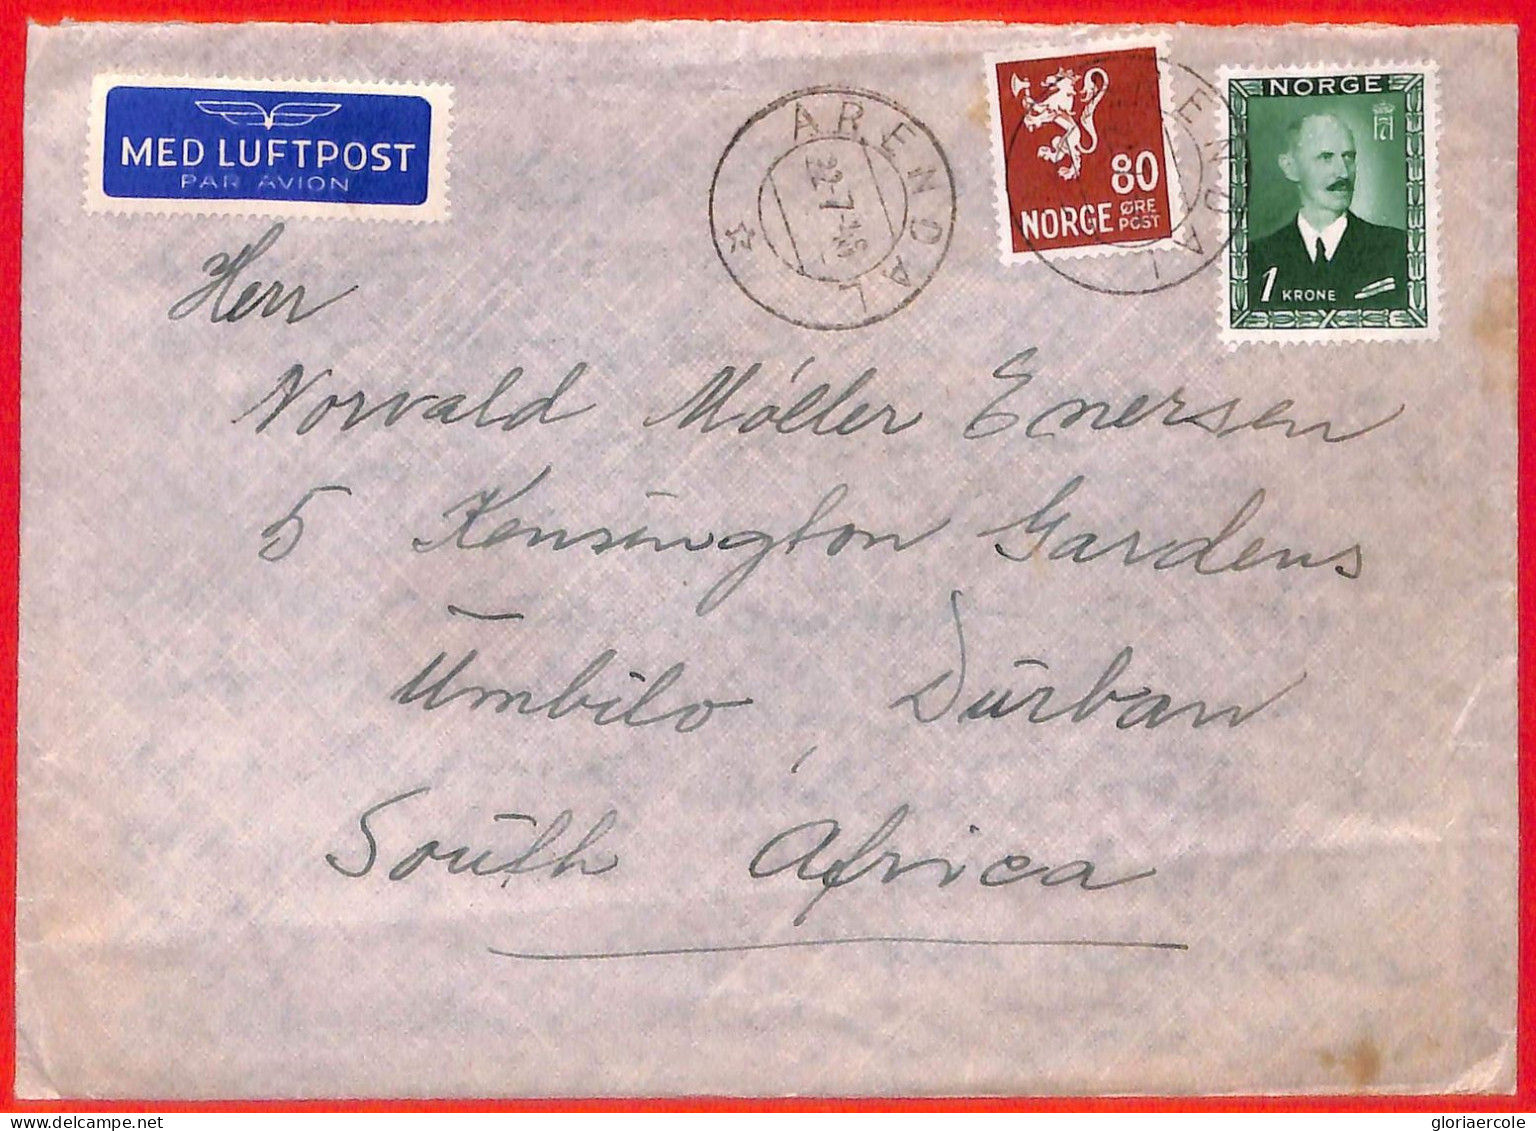 Aa1138 - NORWAY - Postal History -  AIRMAIL COVER To SOUTH AFRICA 1948 - Covers & Documents